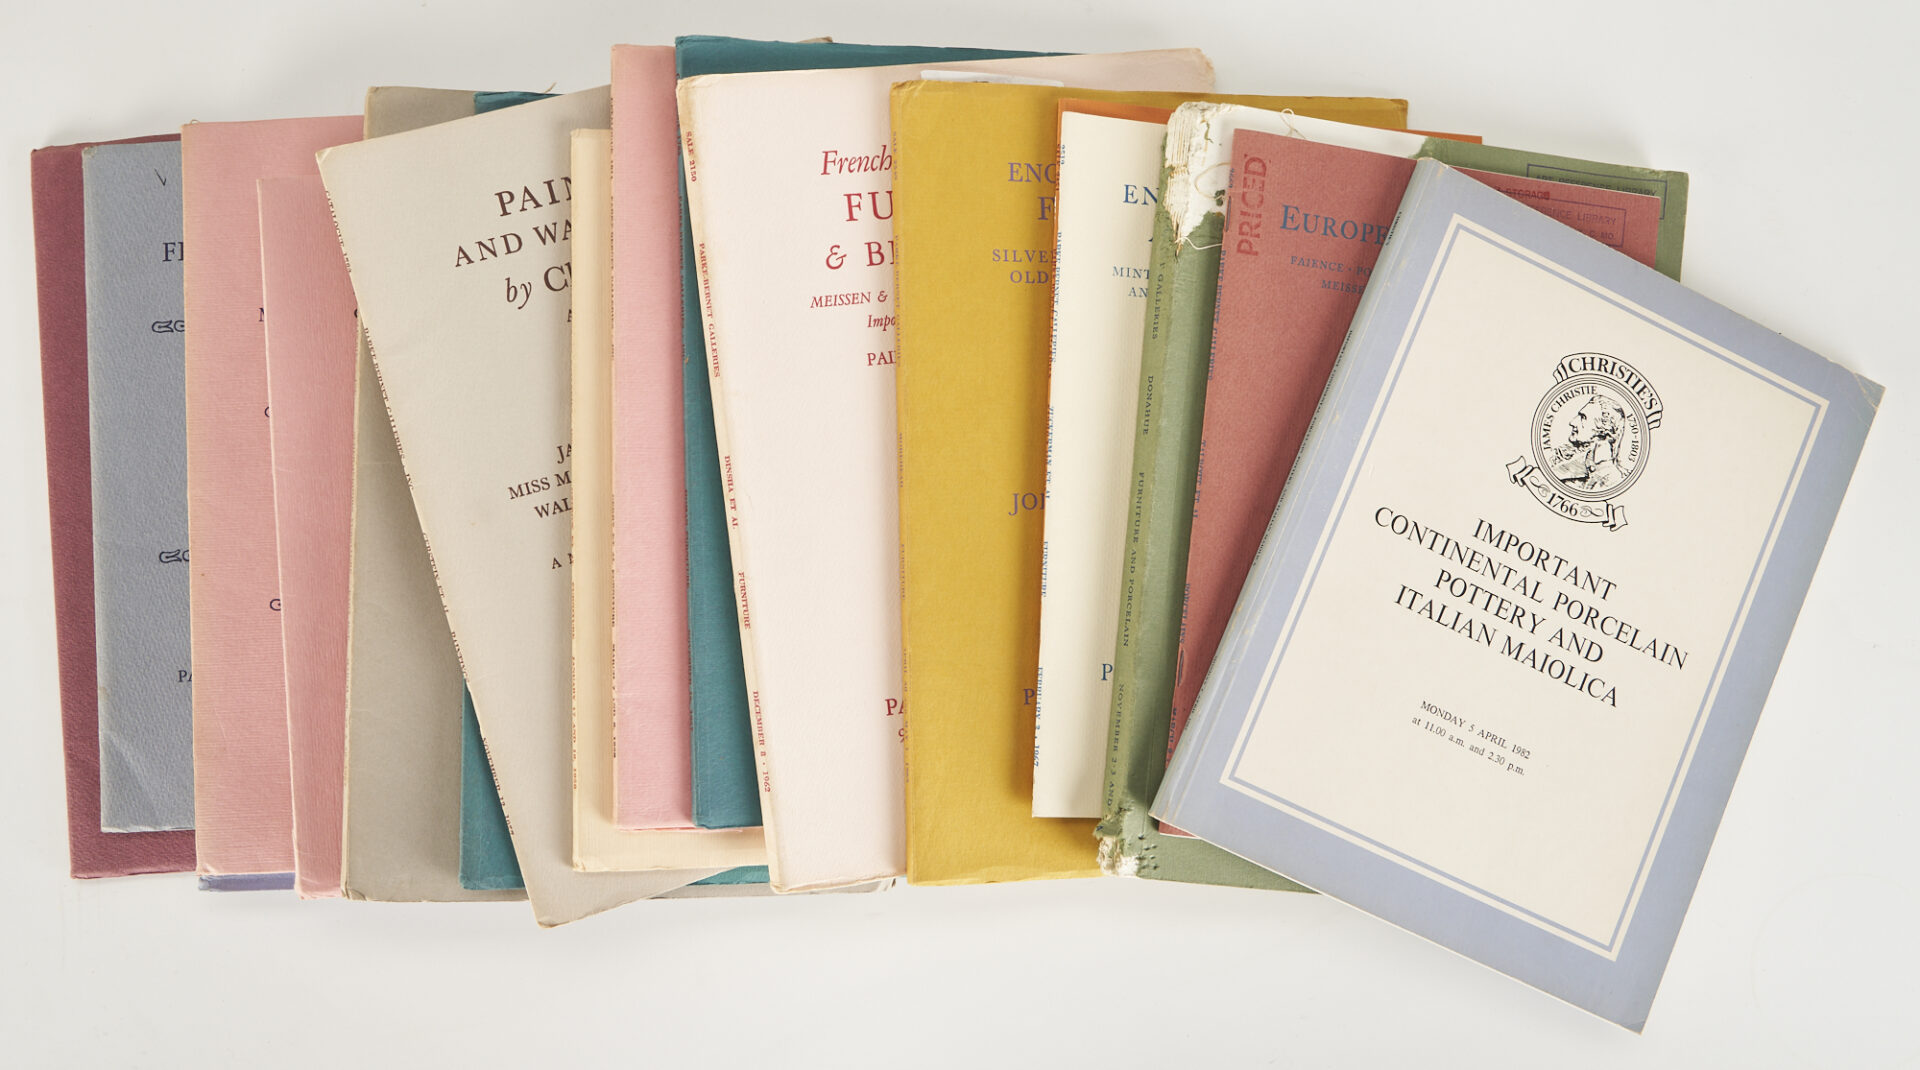 Lot 636: 33 Mid-Century Auction Catalogs from Parke-Bernet & Christies